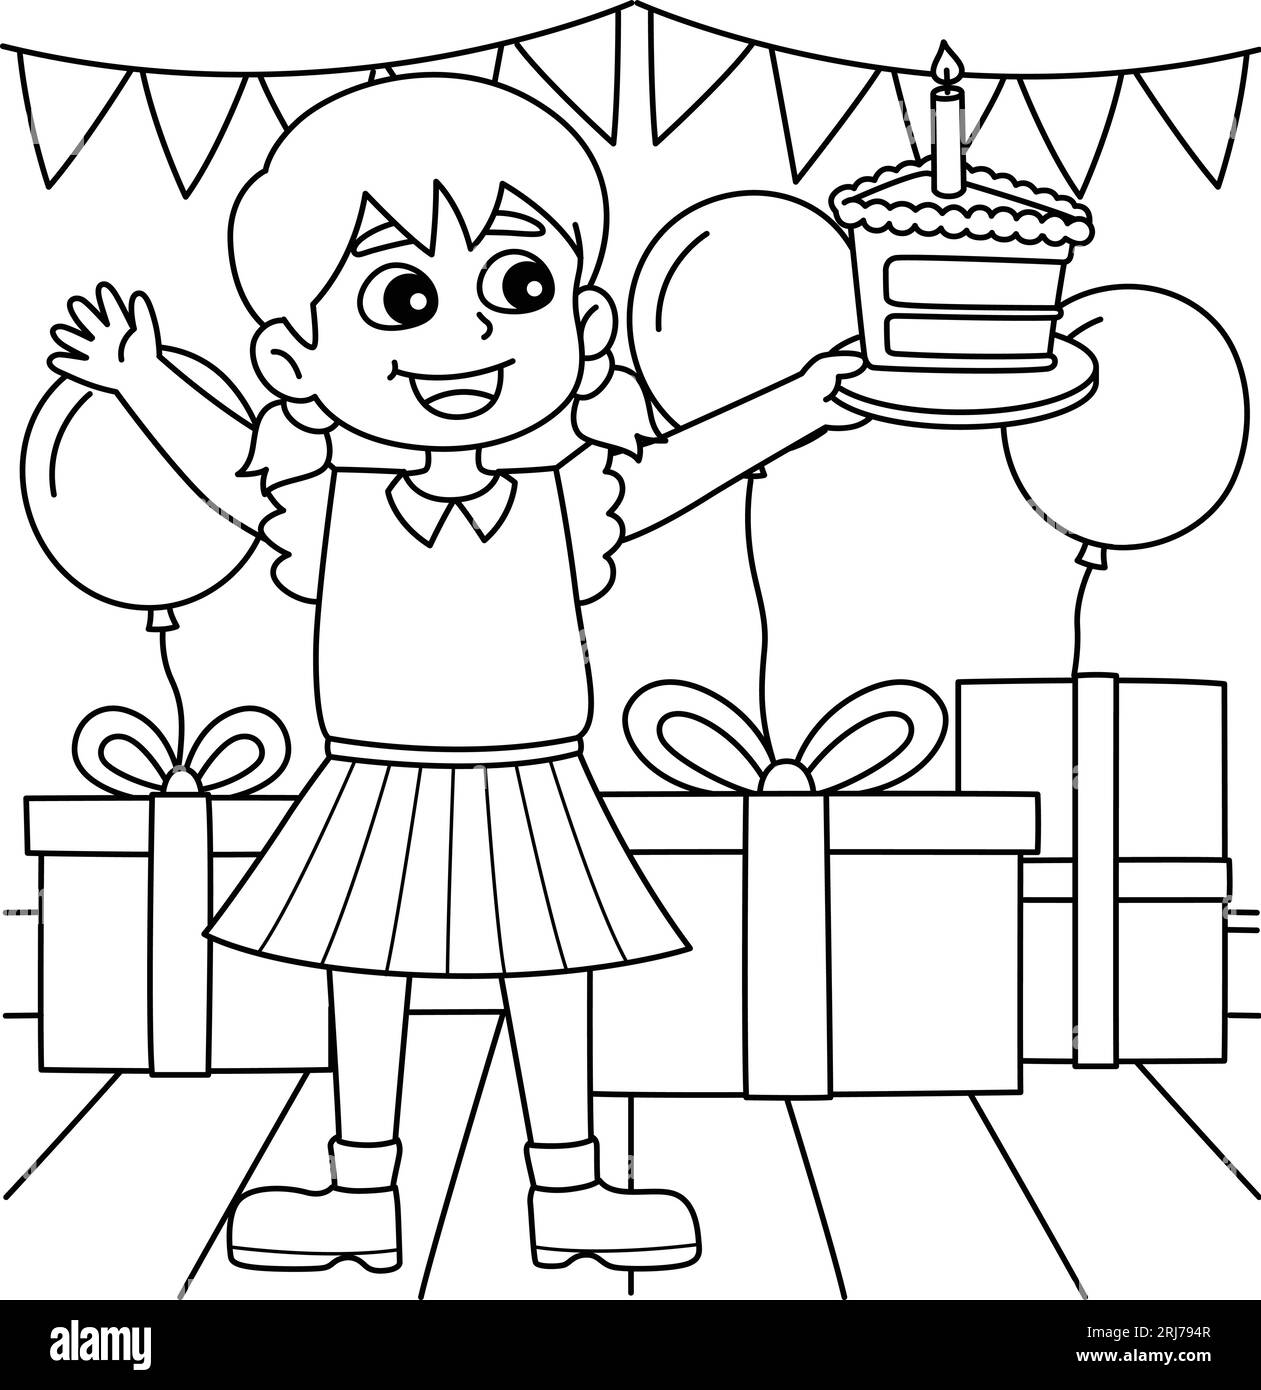 Girl Holding Happy Birthday Cake Coloring Page  Stock Vector